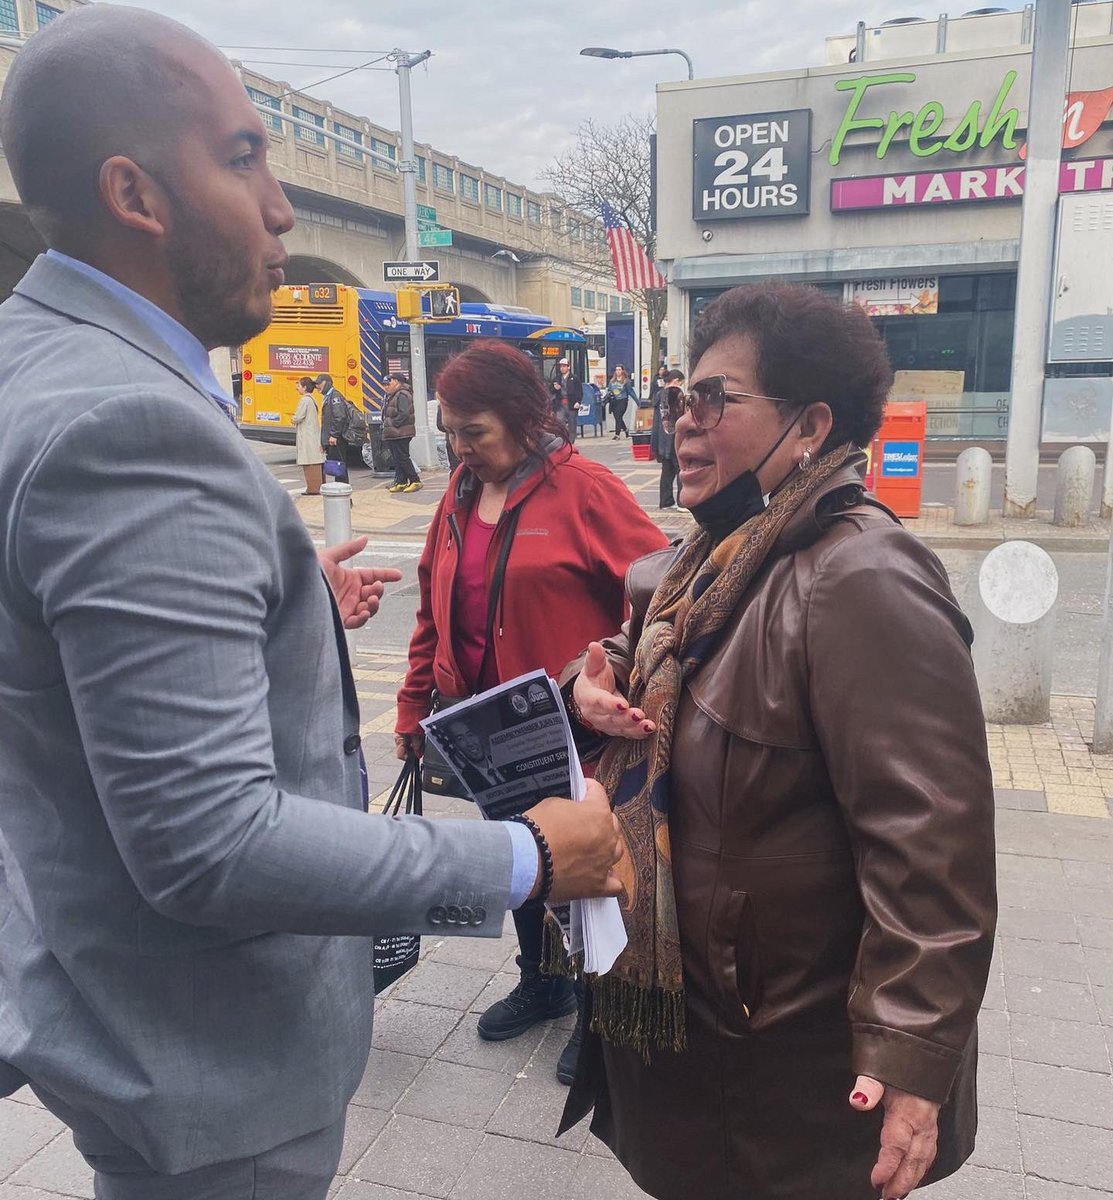 ☀️ It was great to be out in #Sunnyside to do some mobile office hours & discuss the need for tenant protections, climate initiatives, and traffic calming measures in our communities! #Sunnyside #Ridgewood #LIC #Maspeth #Woodside